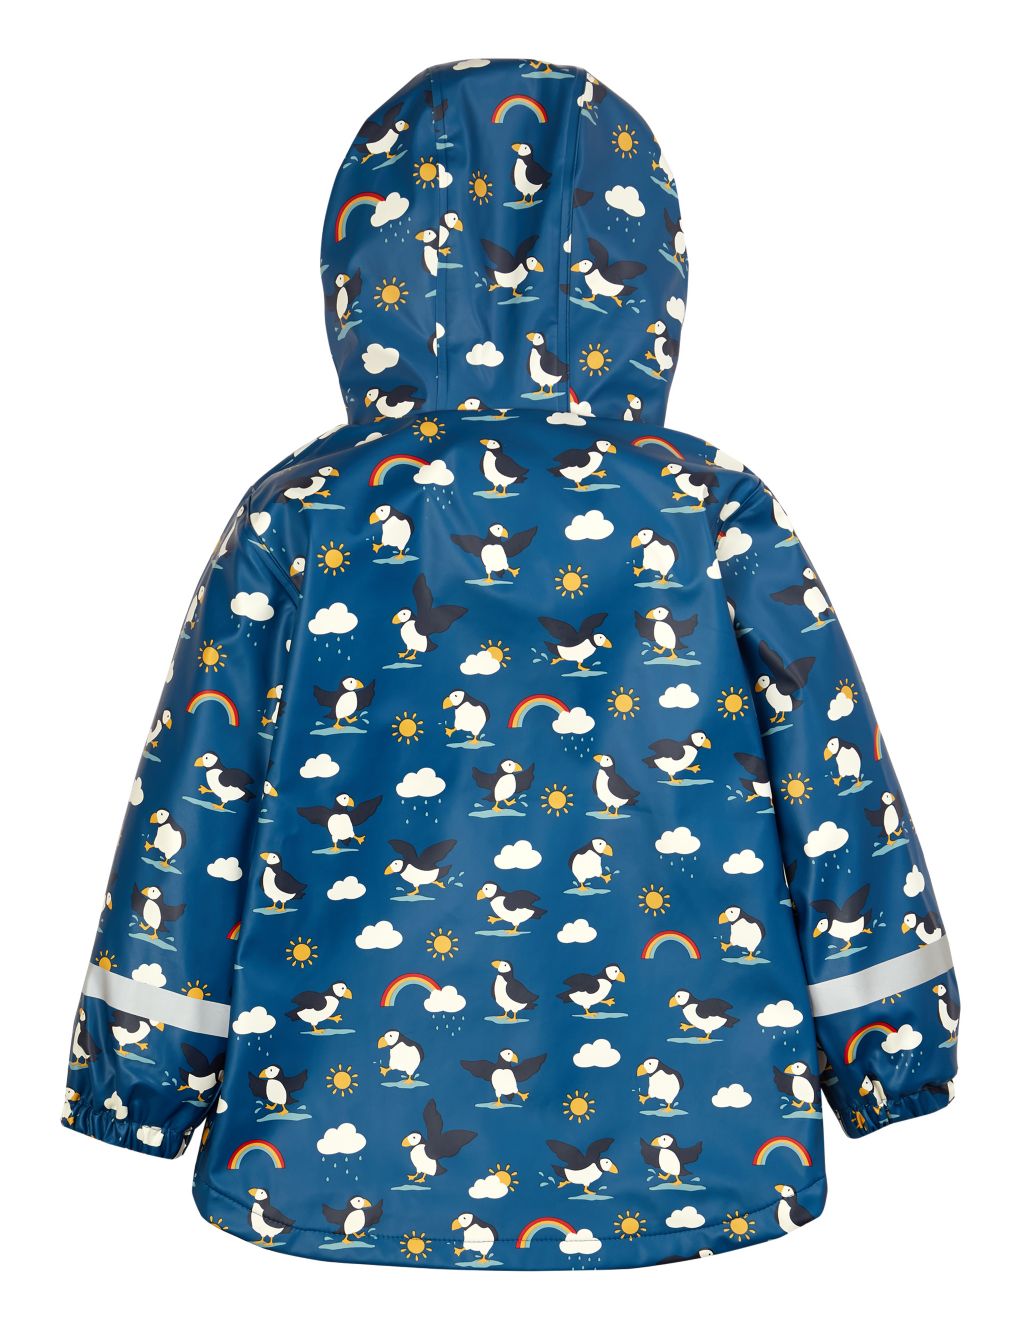 Puffin Print Hooded Fleece Lined Raincoat ( 1 - 10 Yrs) image 2